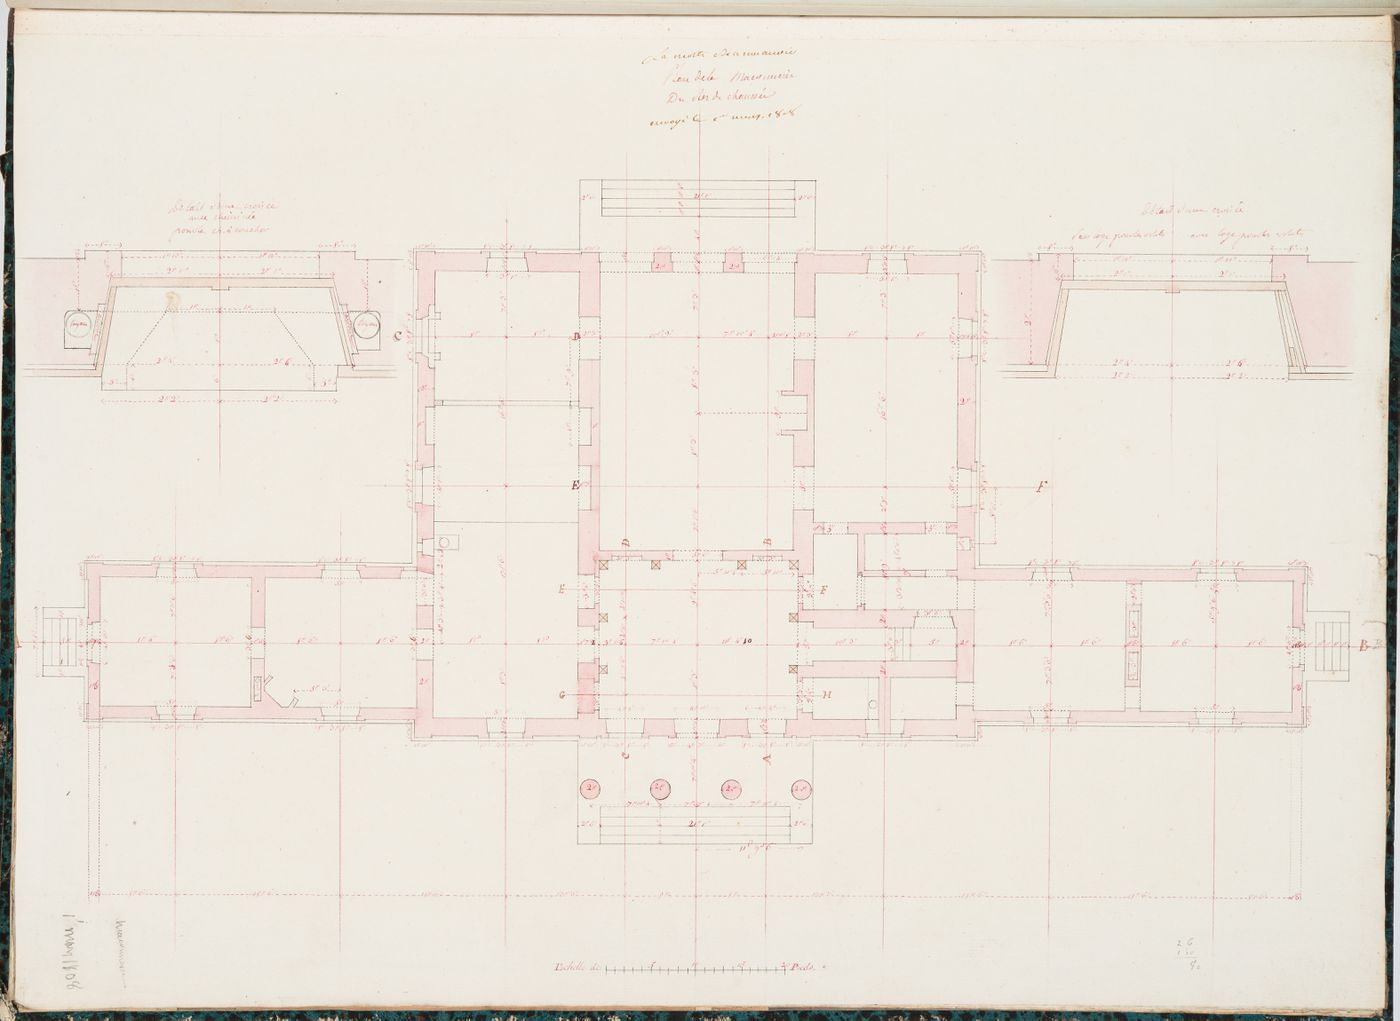 Project for a château for M. de Lorgeril, Motte Beaumanoir: Ground floor plan showing the stonework with plans for the window openings